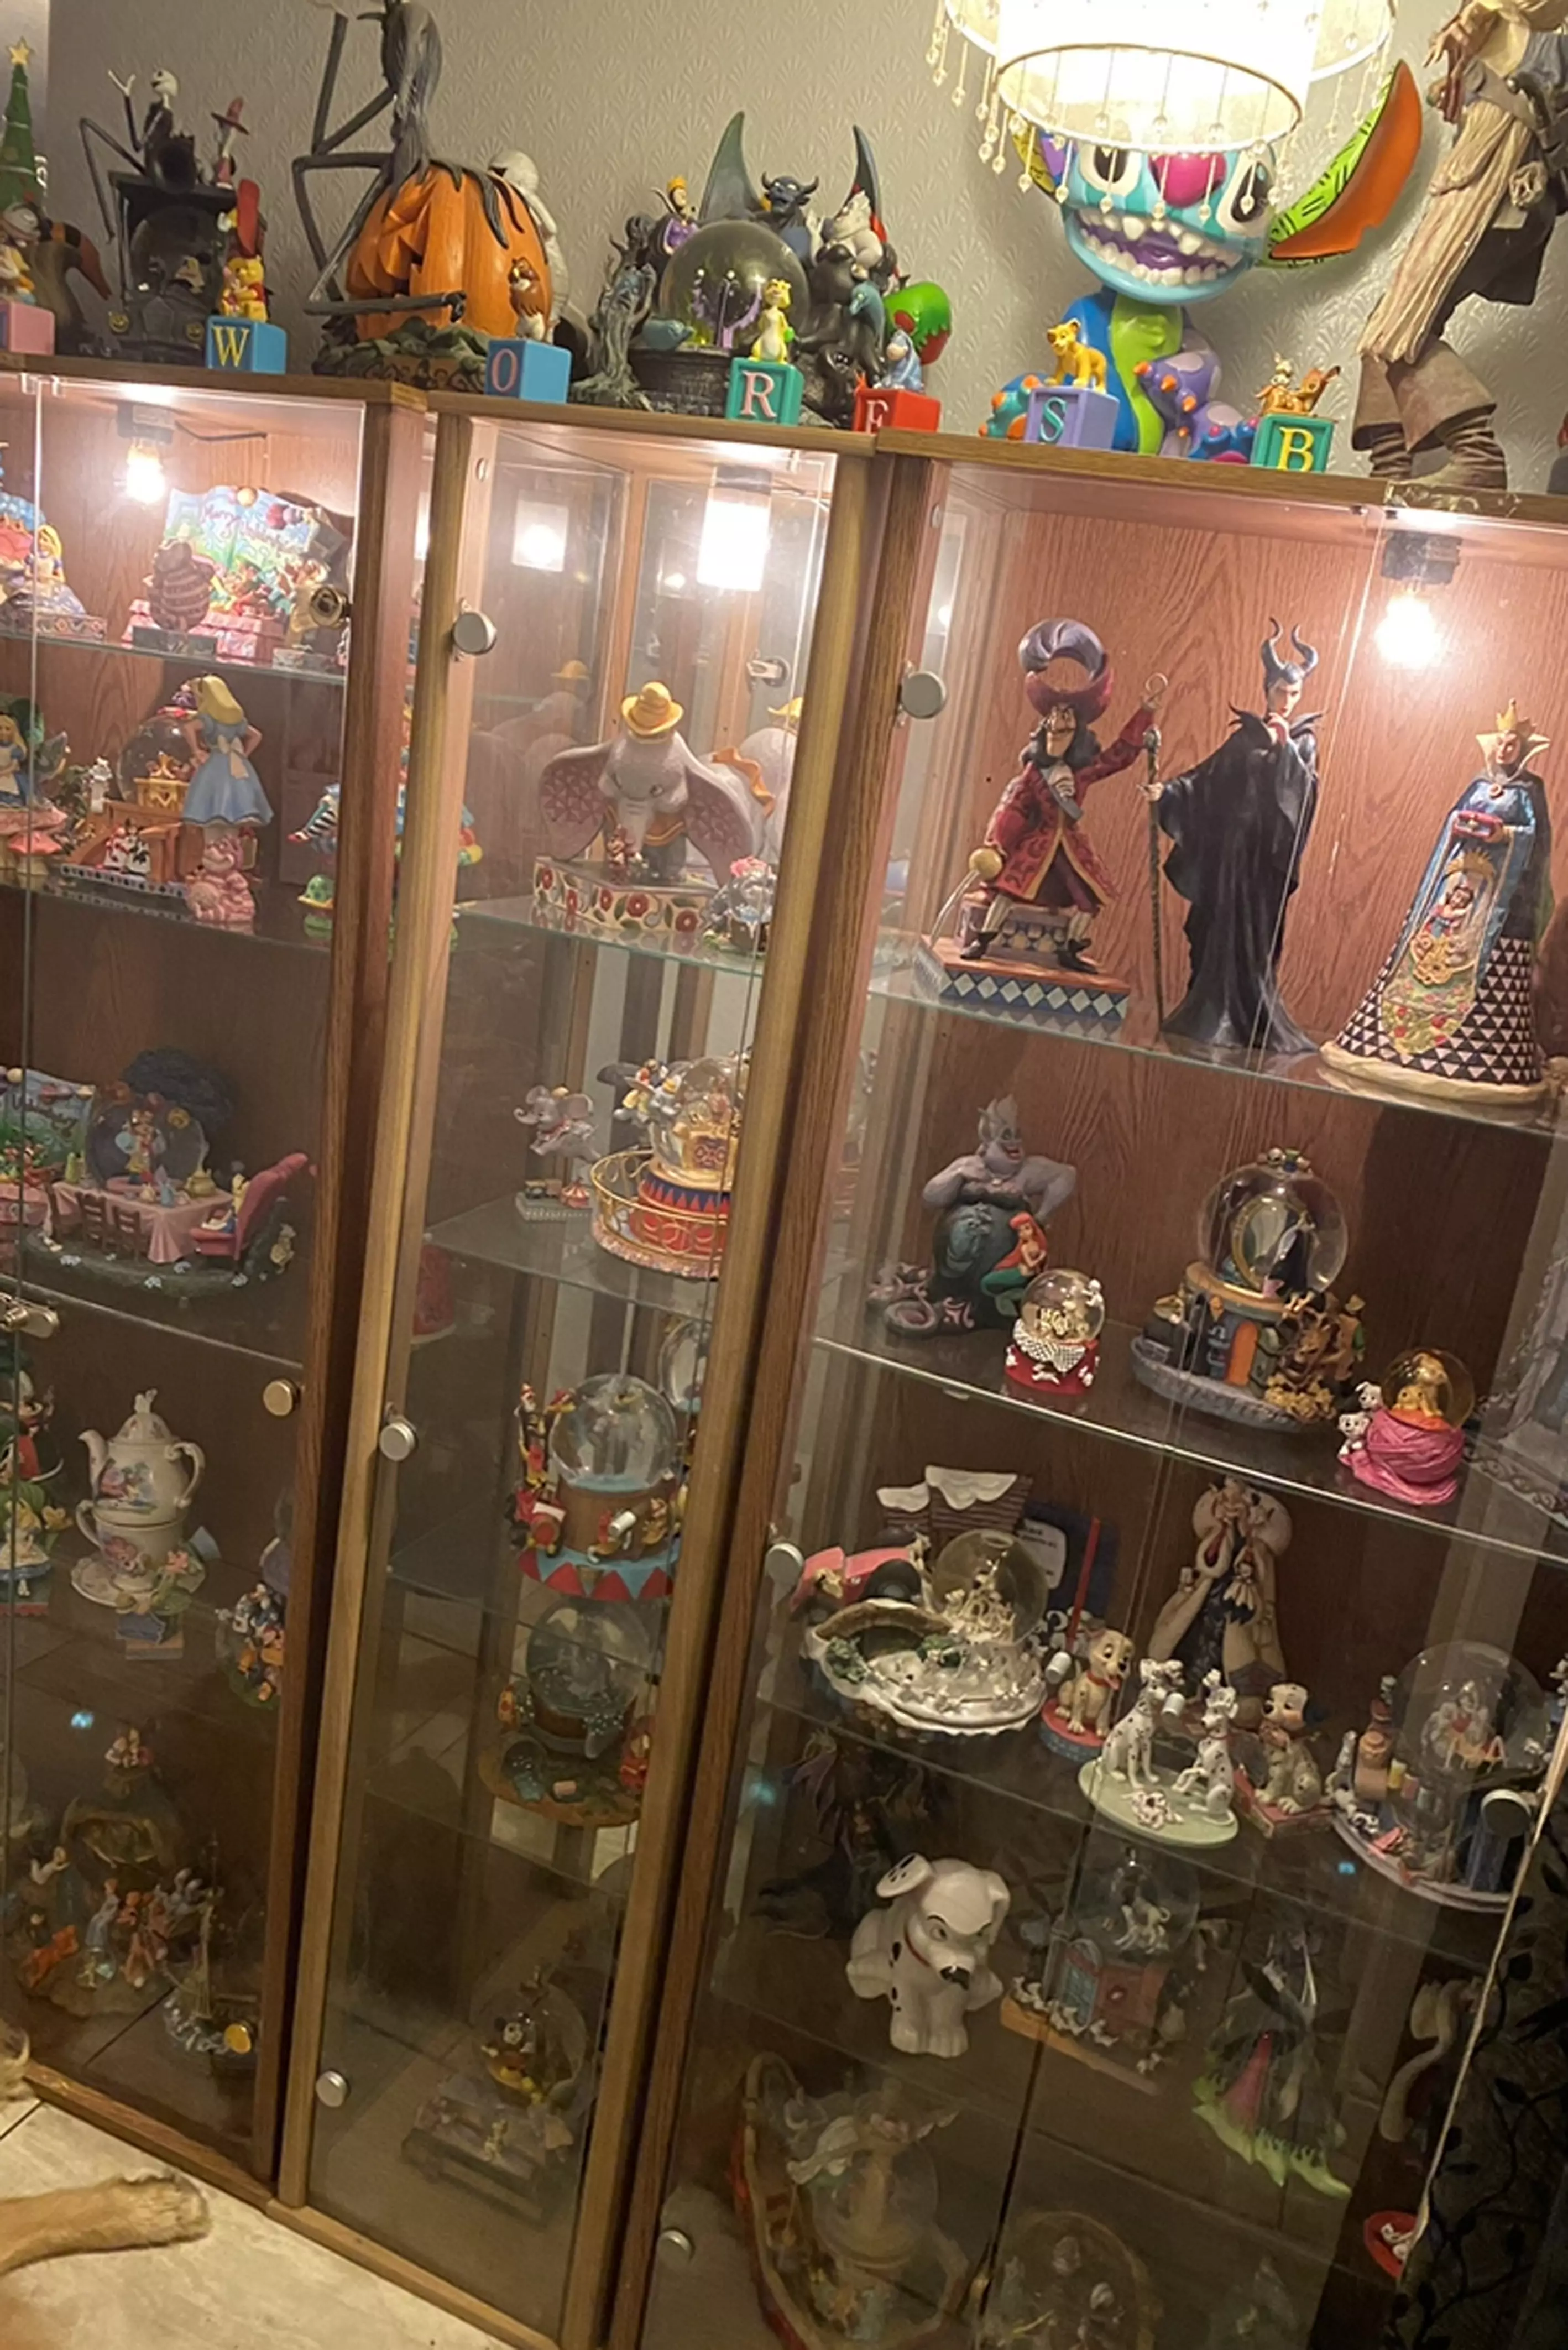 Cabinets are filled top to bottom with figurines (